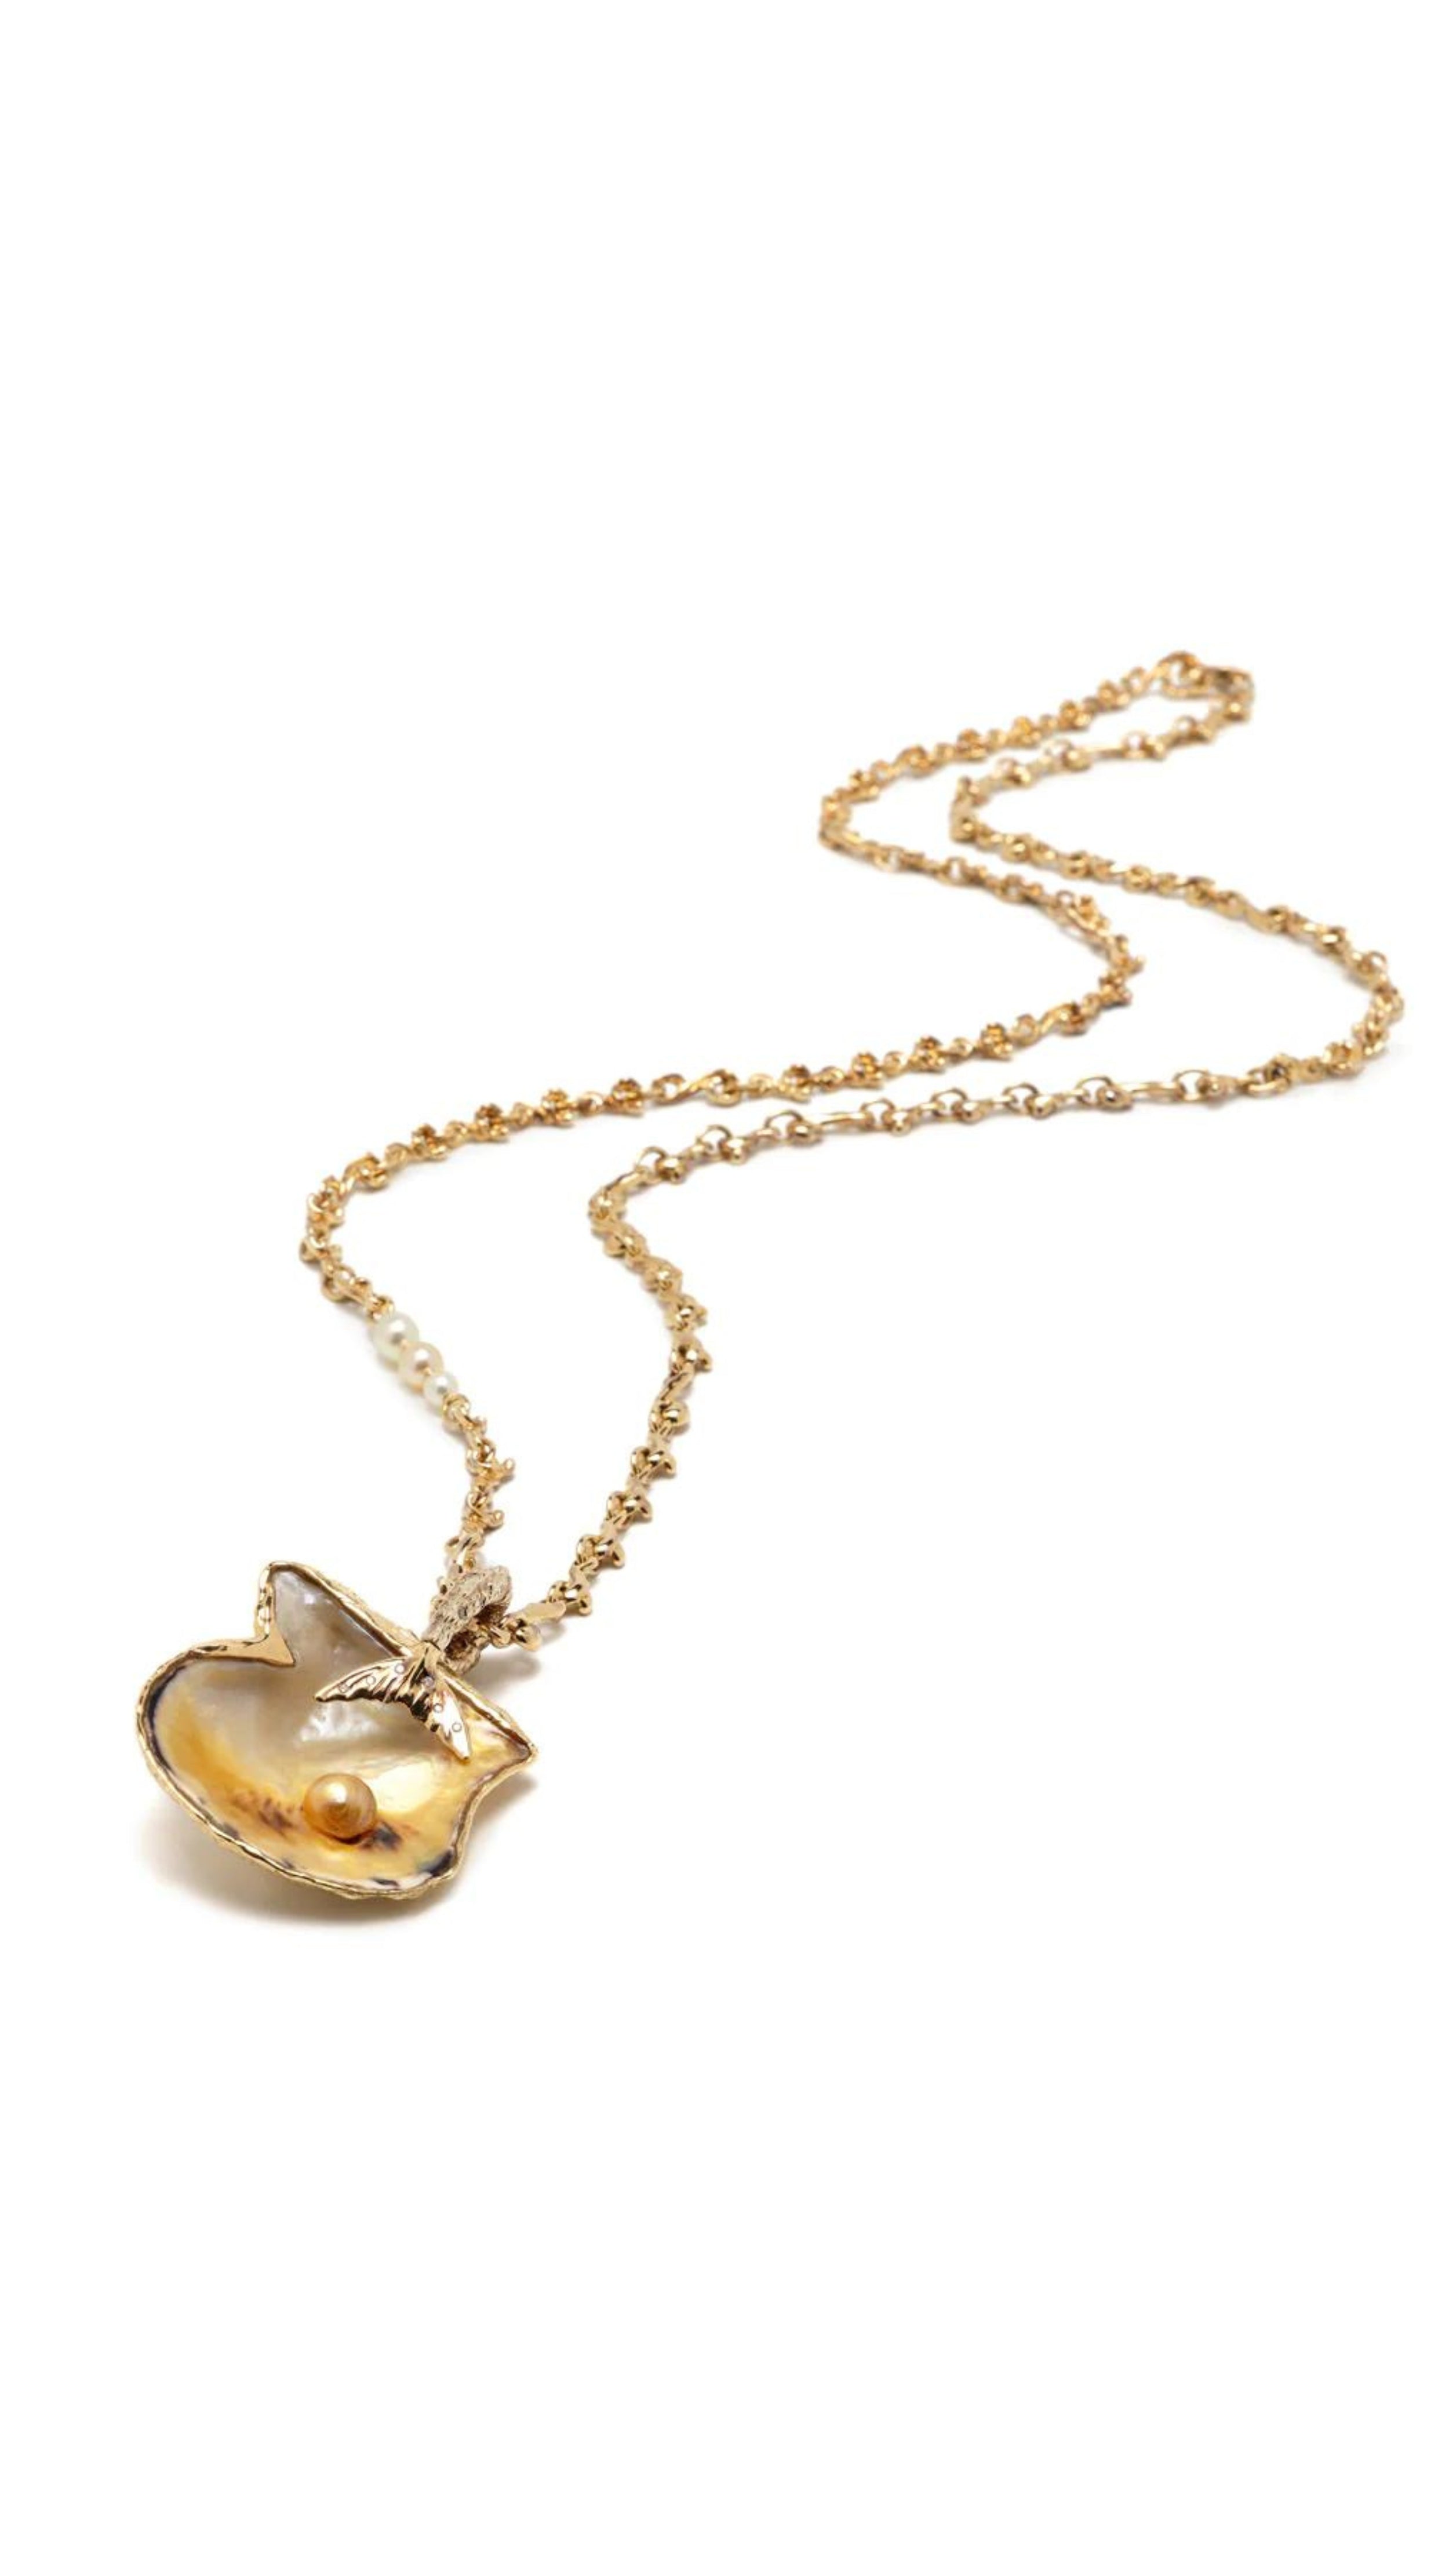 Bibi van der Velden Lagoon Shell Pendant with Wave Chain. 18k yellow gold shell shaped pendant showcases an iridescent pipe pearl for a shimmering effect. With a white diamond and a cream pearl on the interior and a wave chain crafted from 18k yellow gold.